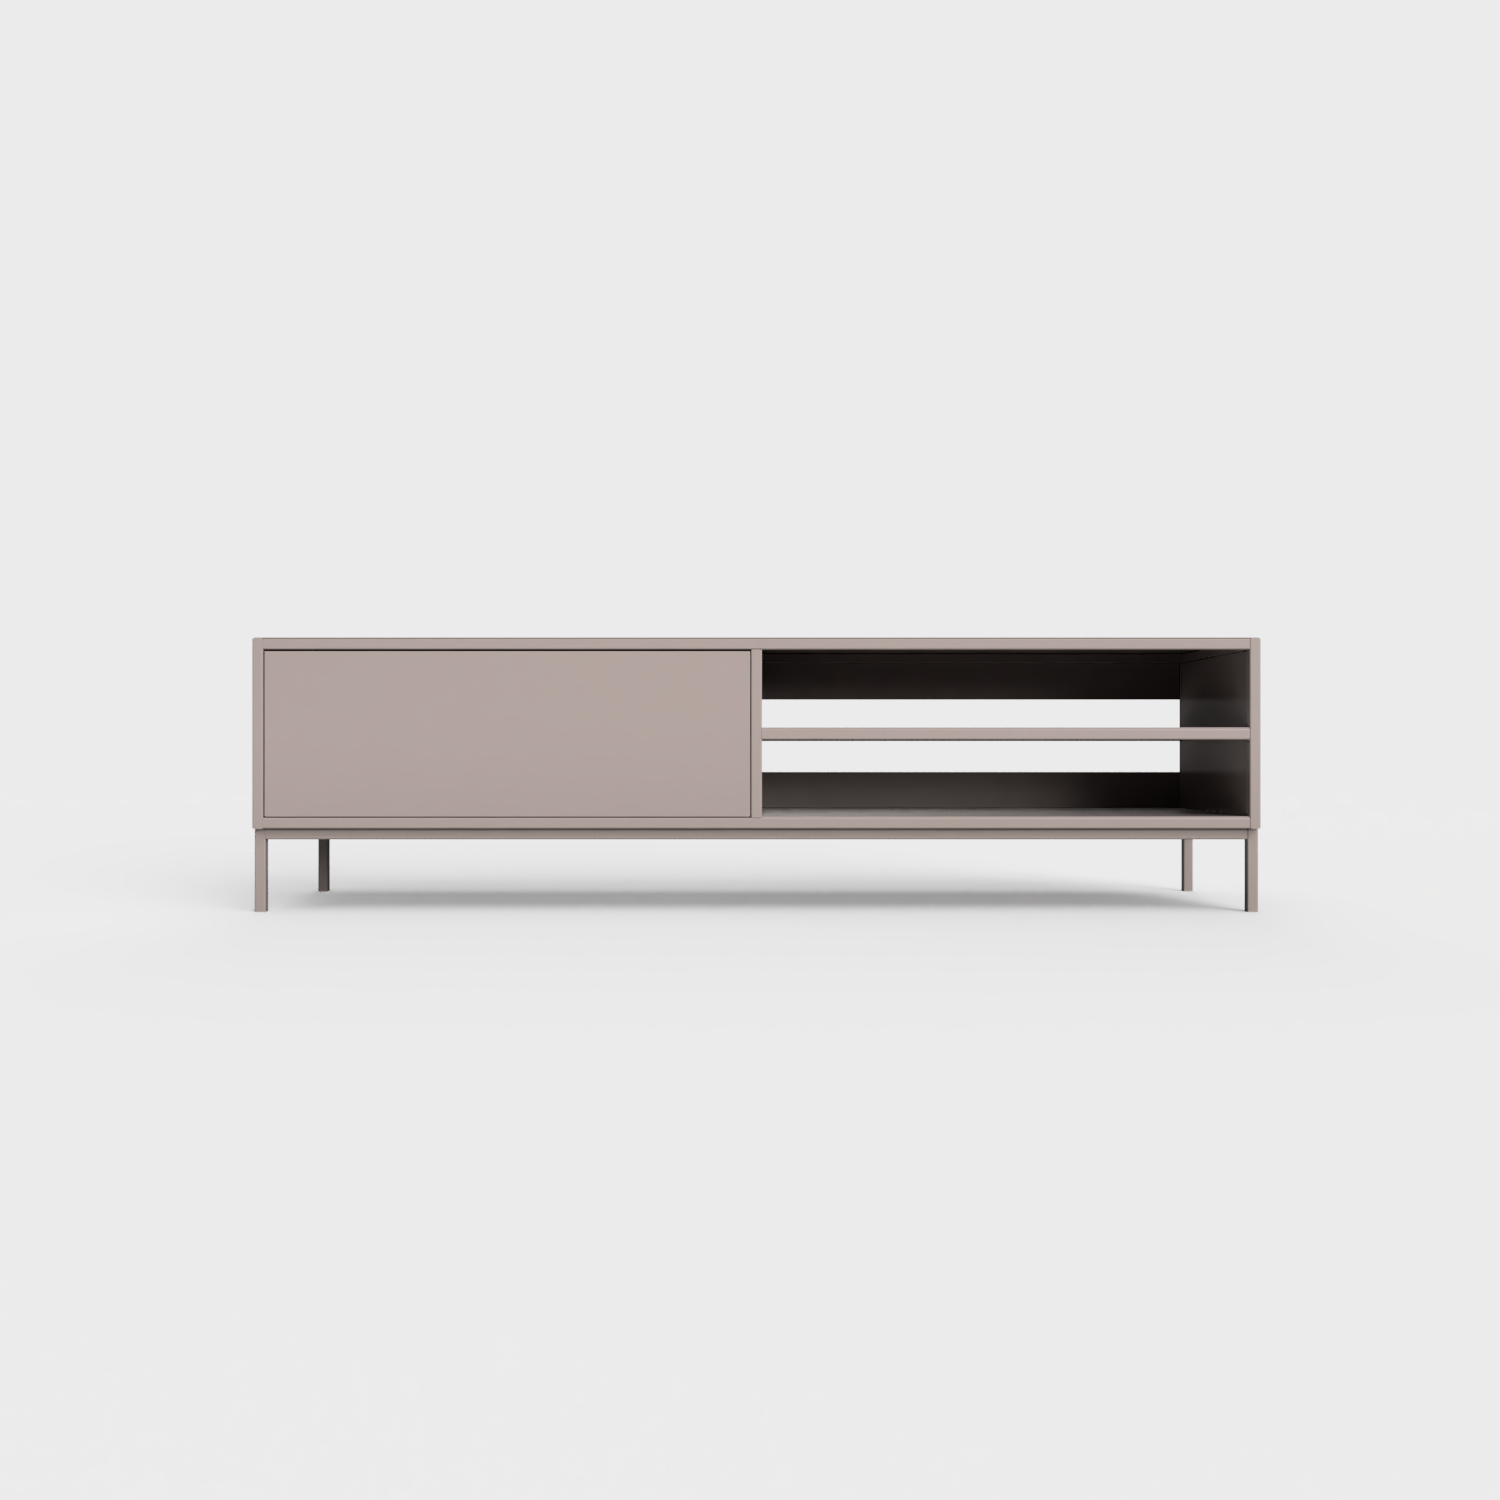 Prunus 02 Lowboard in Cold Beige color, powder-coated steel, elegant and modern piece of furniture for your living room